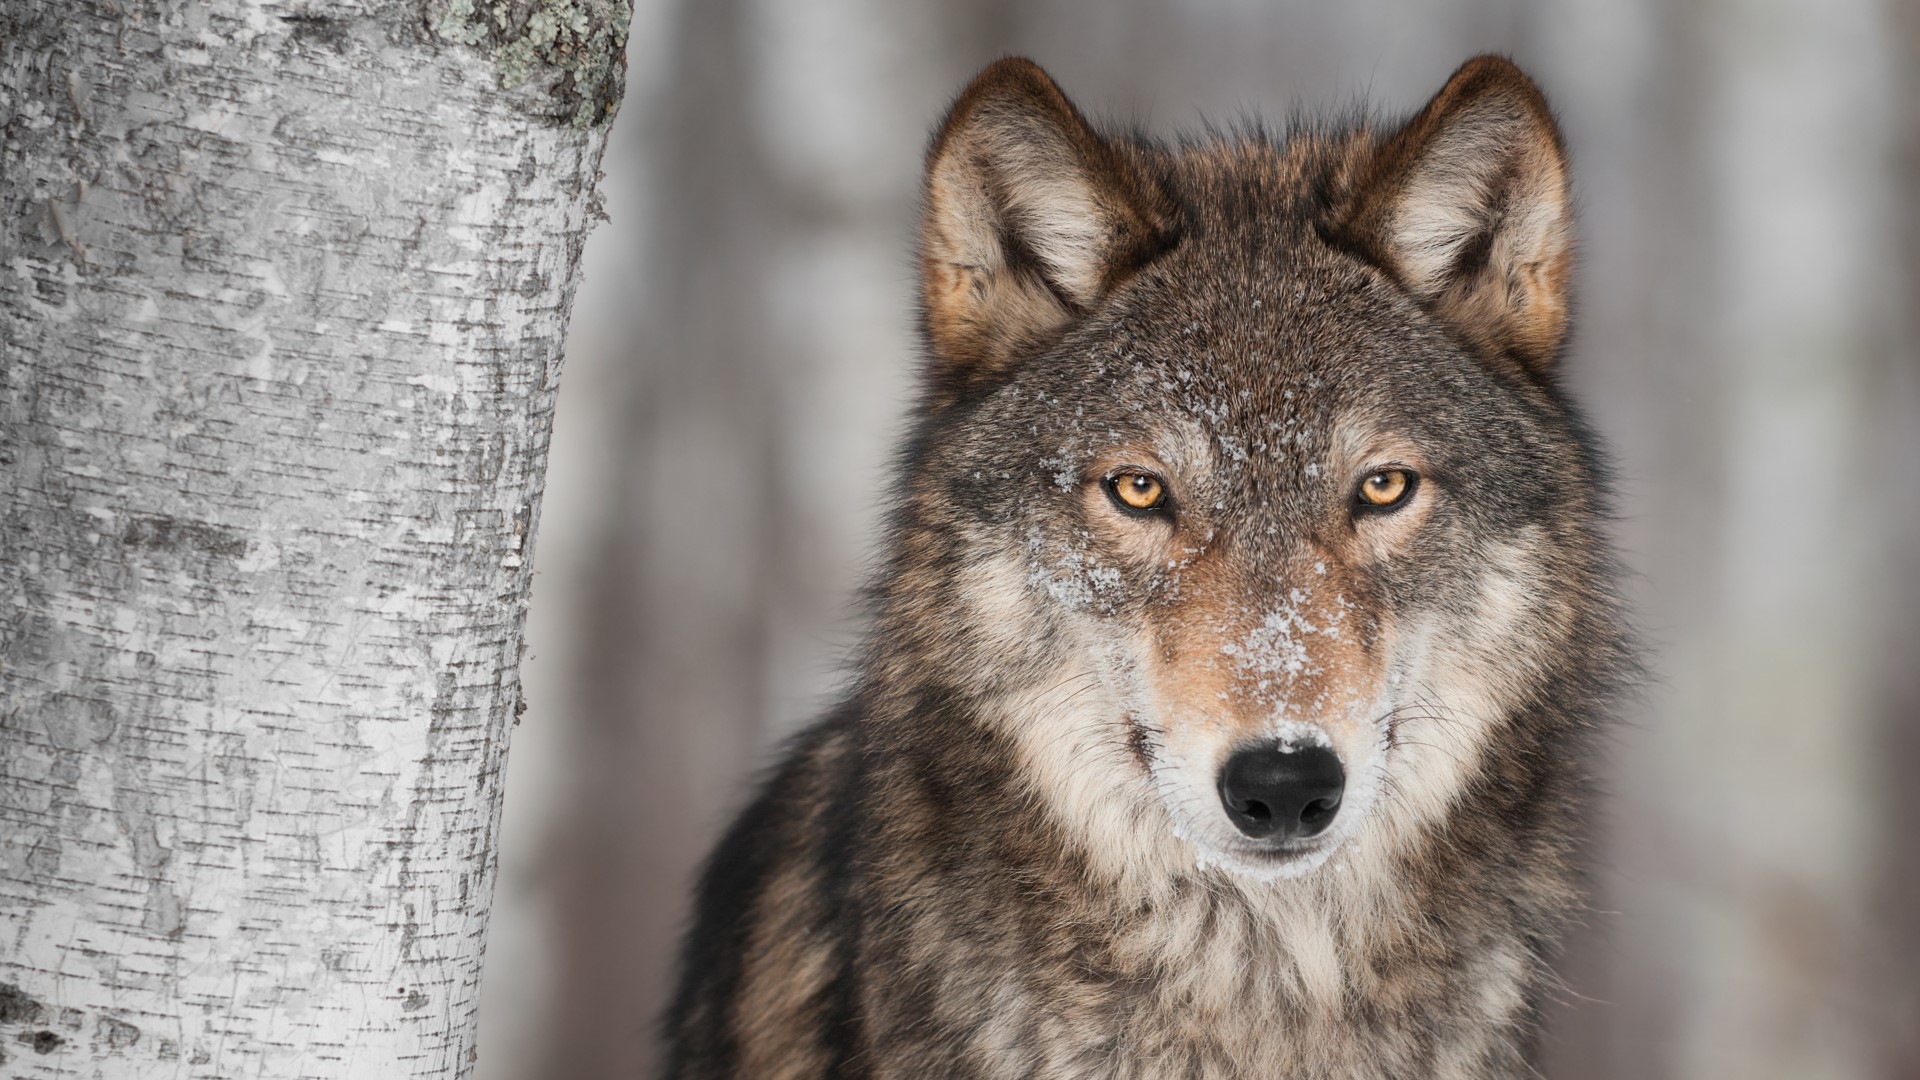 Colorado voters passed Prop. 114, an initiative in Nov. 2020, that asked to allow CPW to reintroduce grey wolves west of the Continental Divide by the end of 2023.